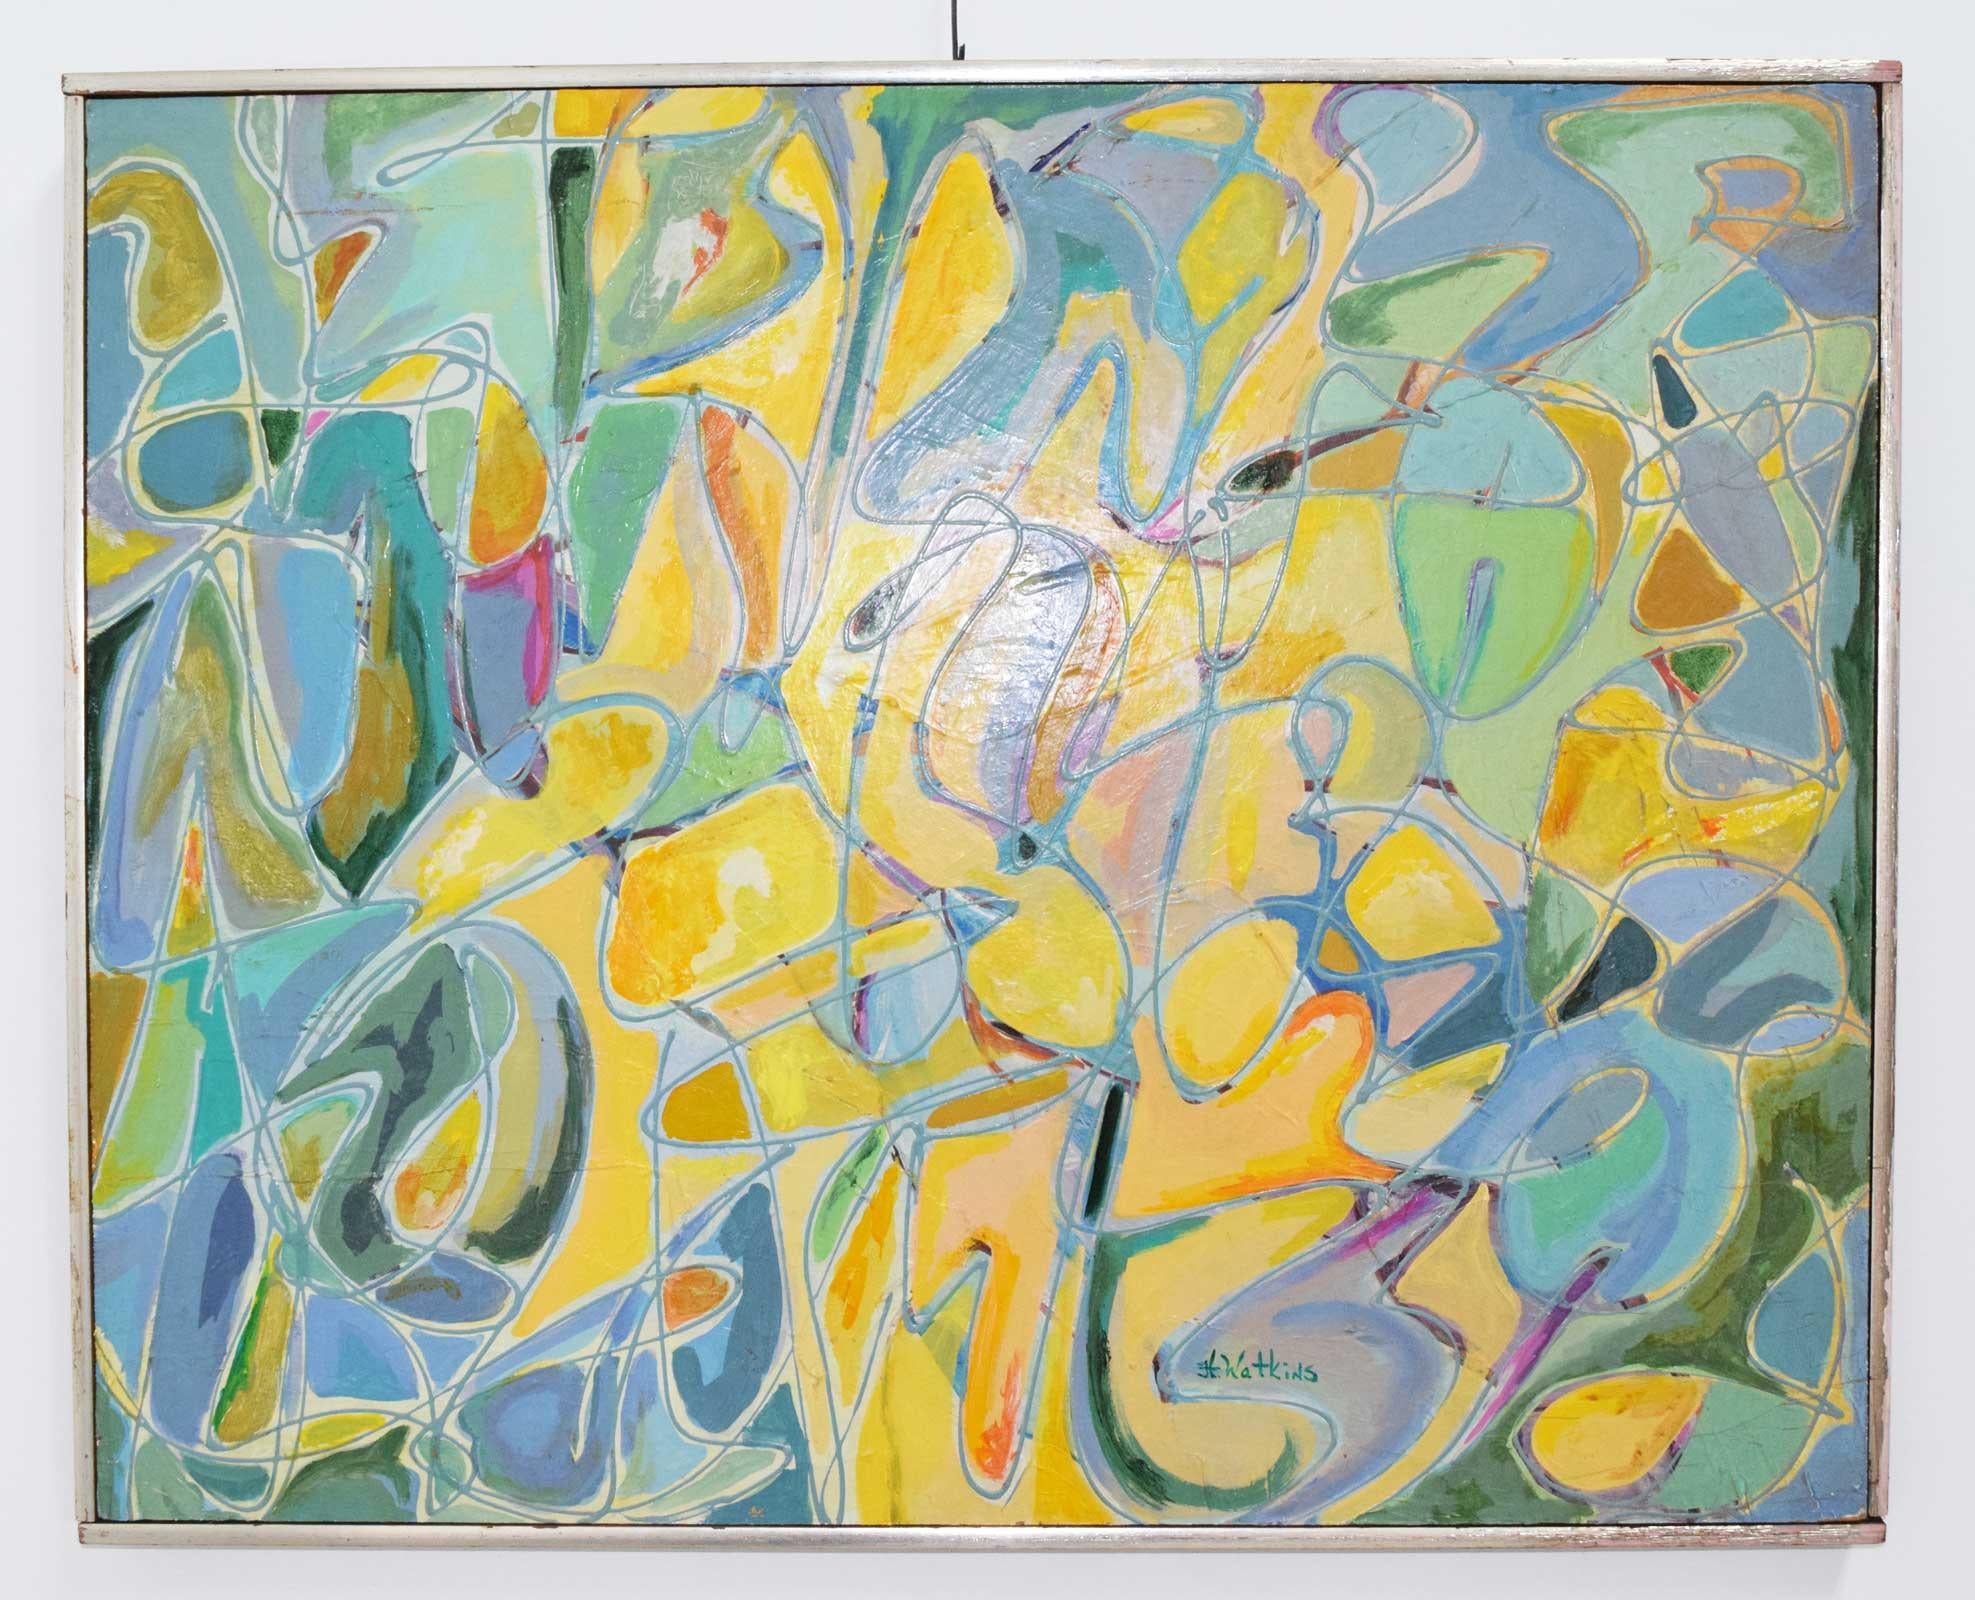 Beautiful colorful oil painting on board, signed H. Watkins and dated 1974. Colorful blues, yellows, greens with drip technique.